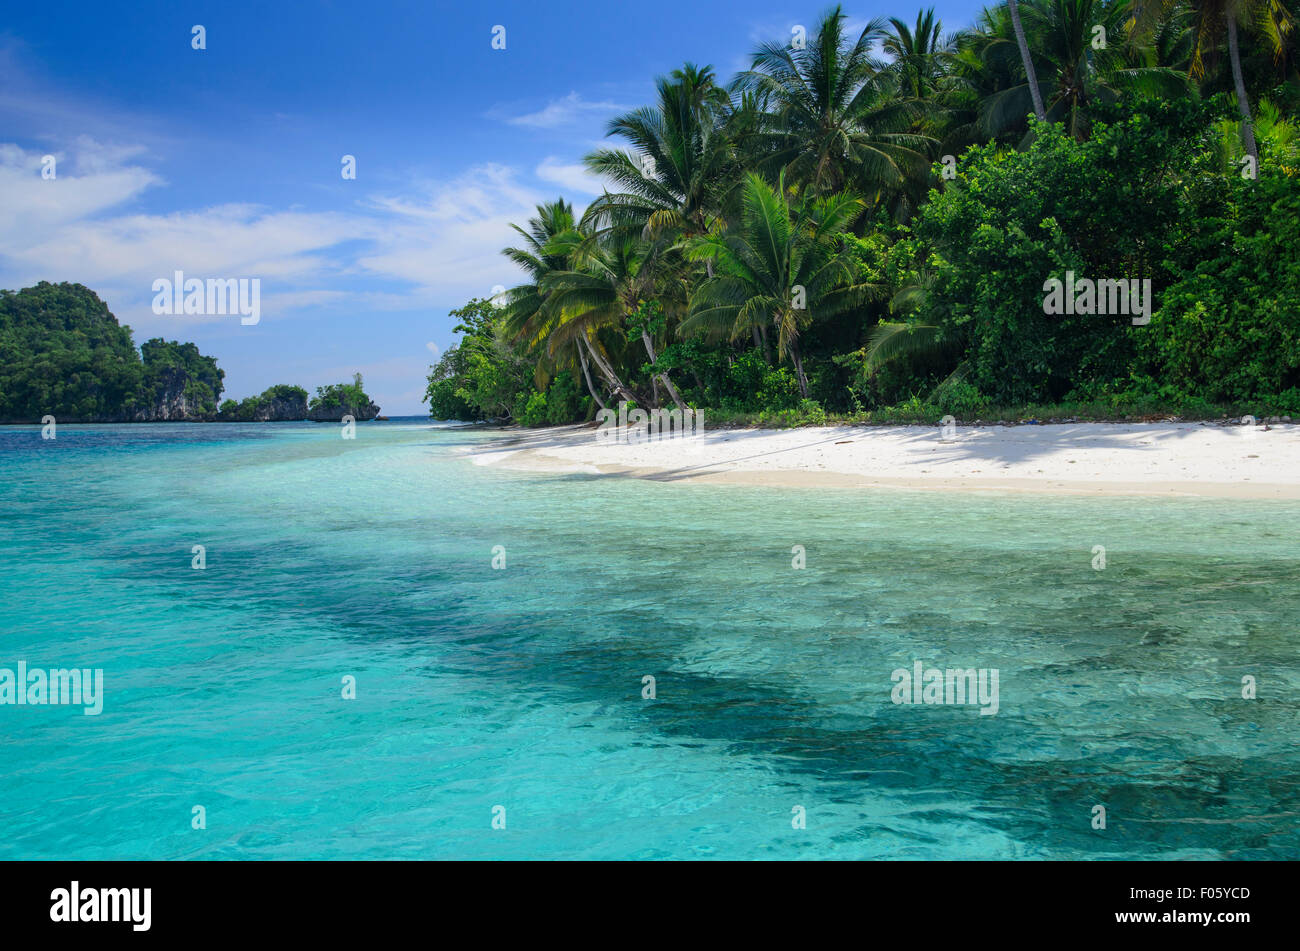 White sand beach on a tropical island surrounded by coral reef, Raja Ampat, Indonesia, Pacific Ocean Stock Photo